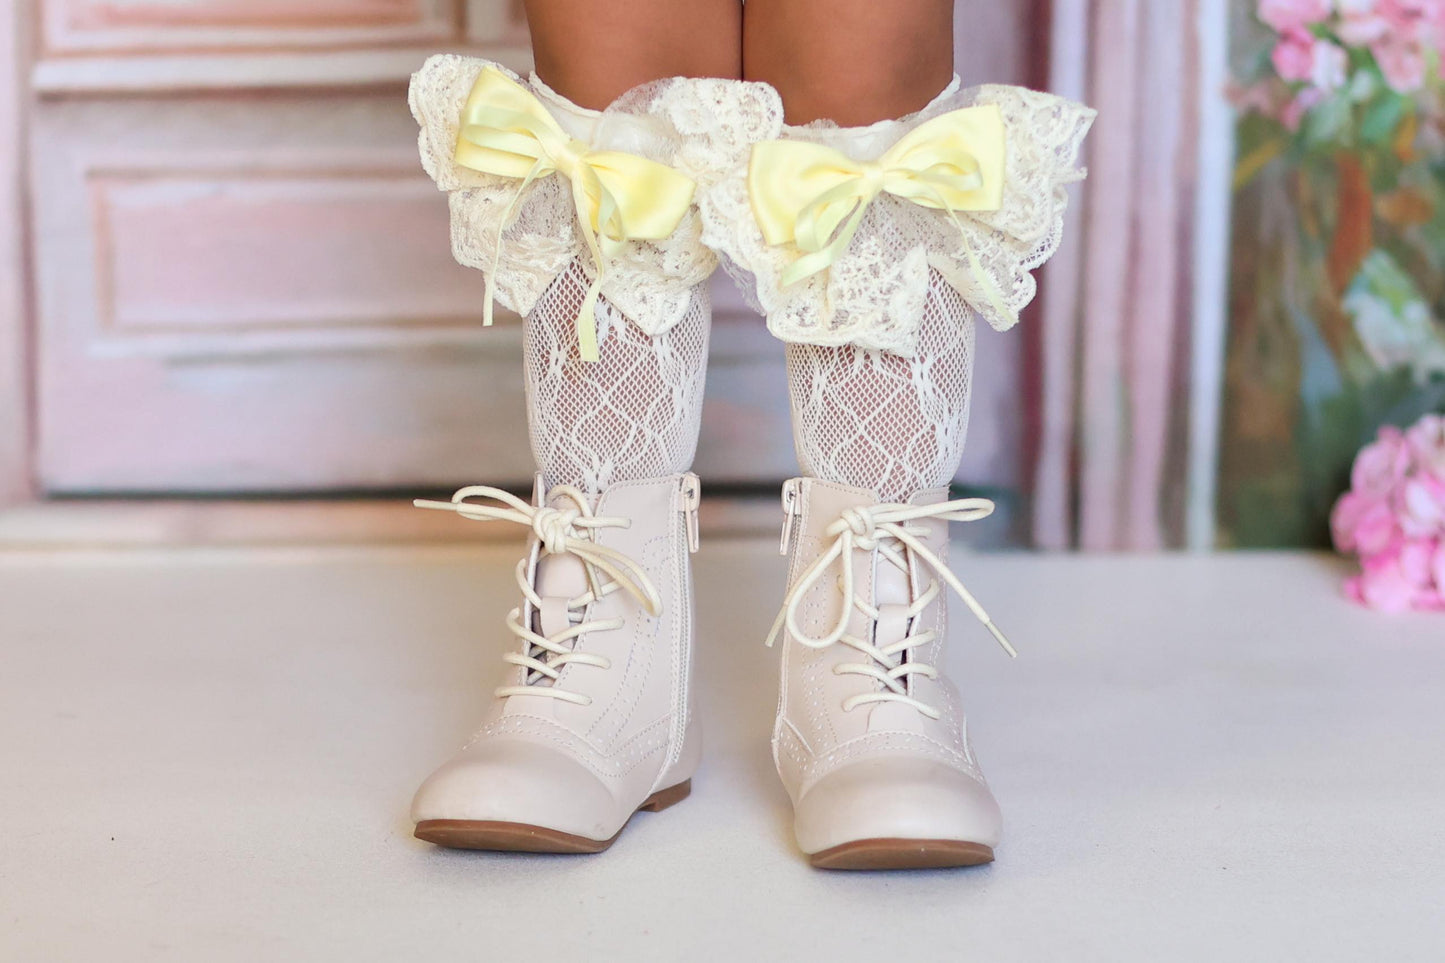 Spring Lace double bow stockings